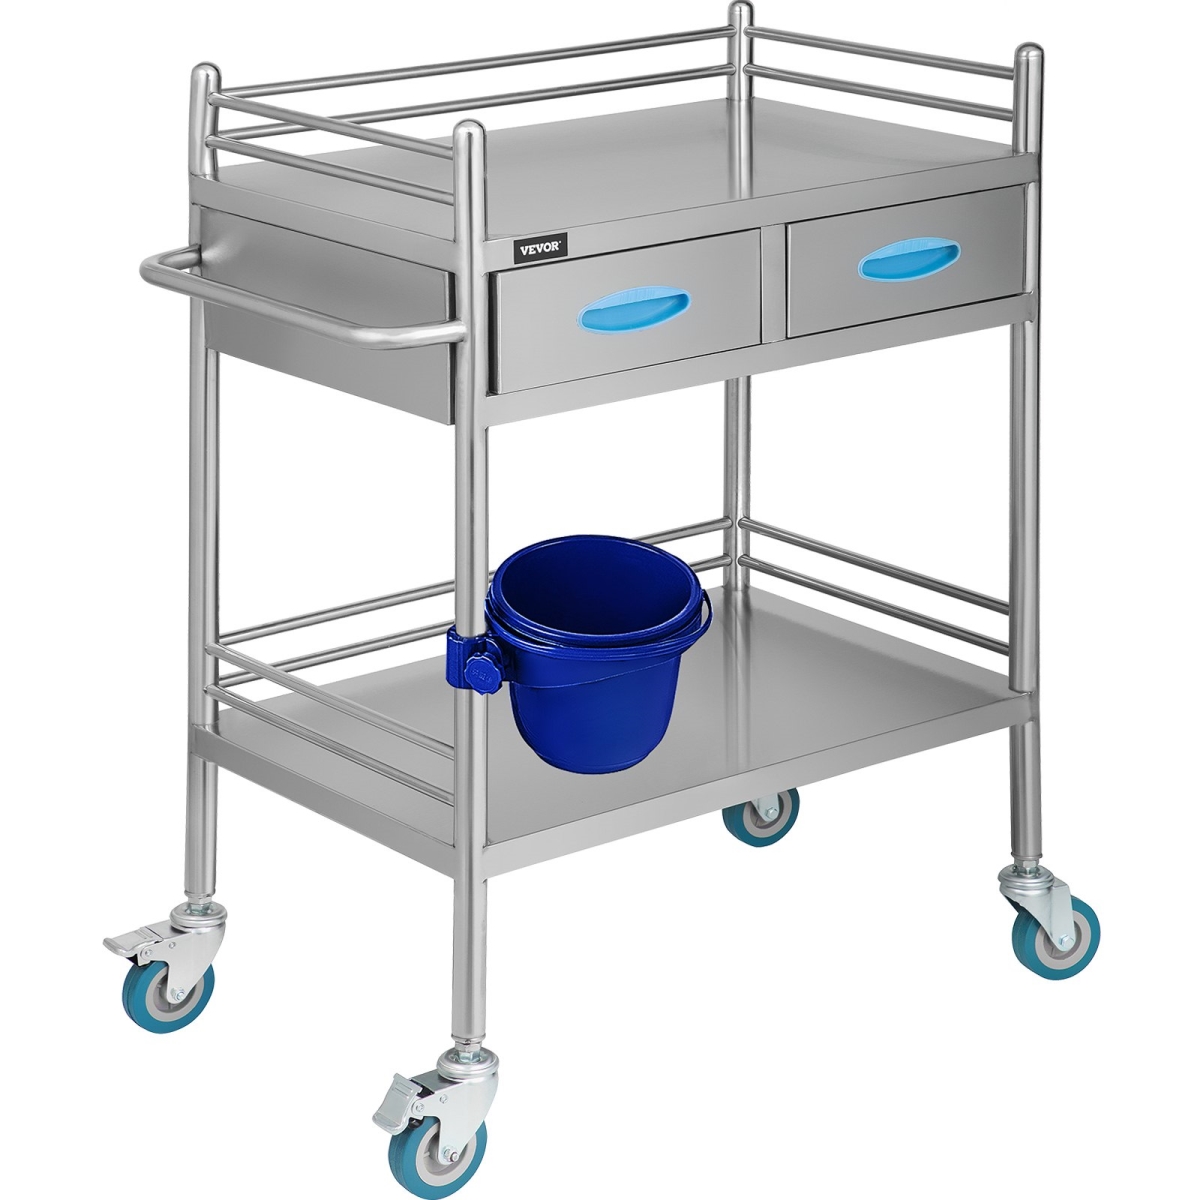 Picture of Vevor SYSSTC-2FD2CT0001V0 Stainless Steel Lab Serving Cart Utility Cart